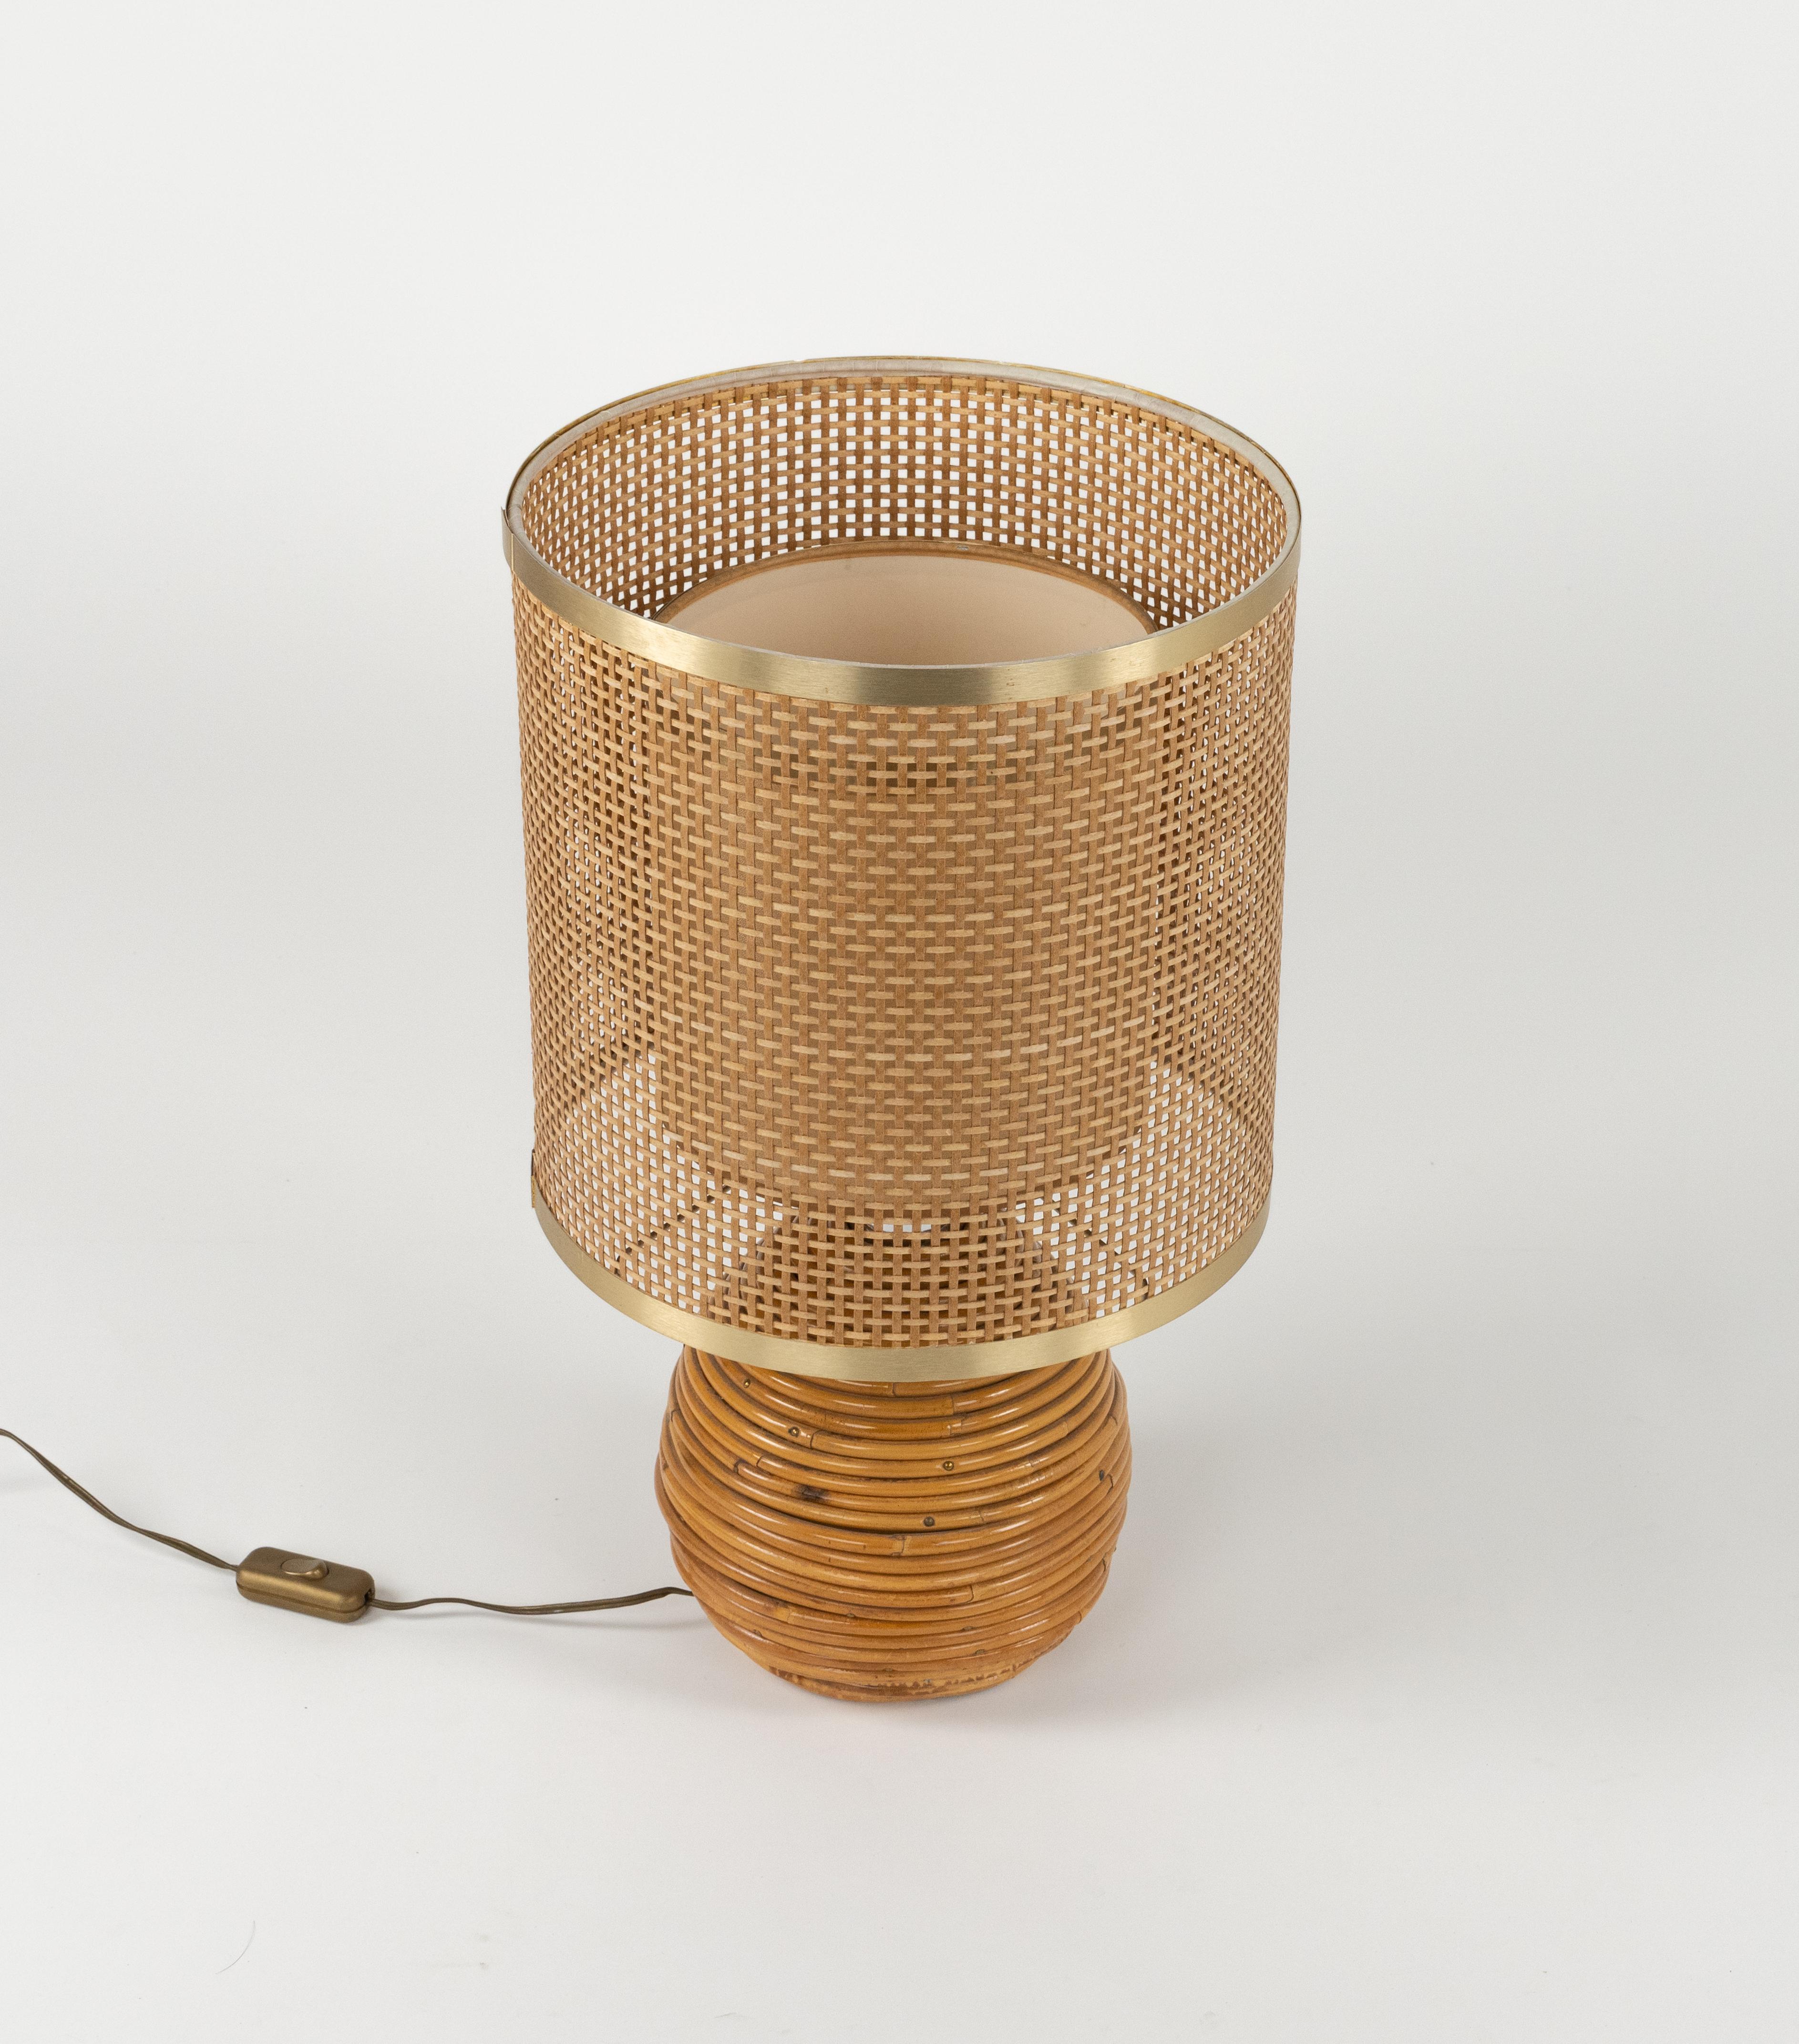 Midcentury Rattan, Wicker and Chrome Table Lamp by Vivai Del Sud, Italy 1970s For Sale 2